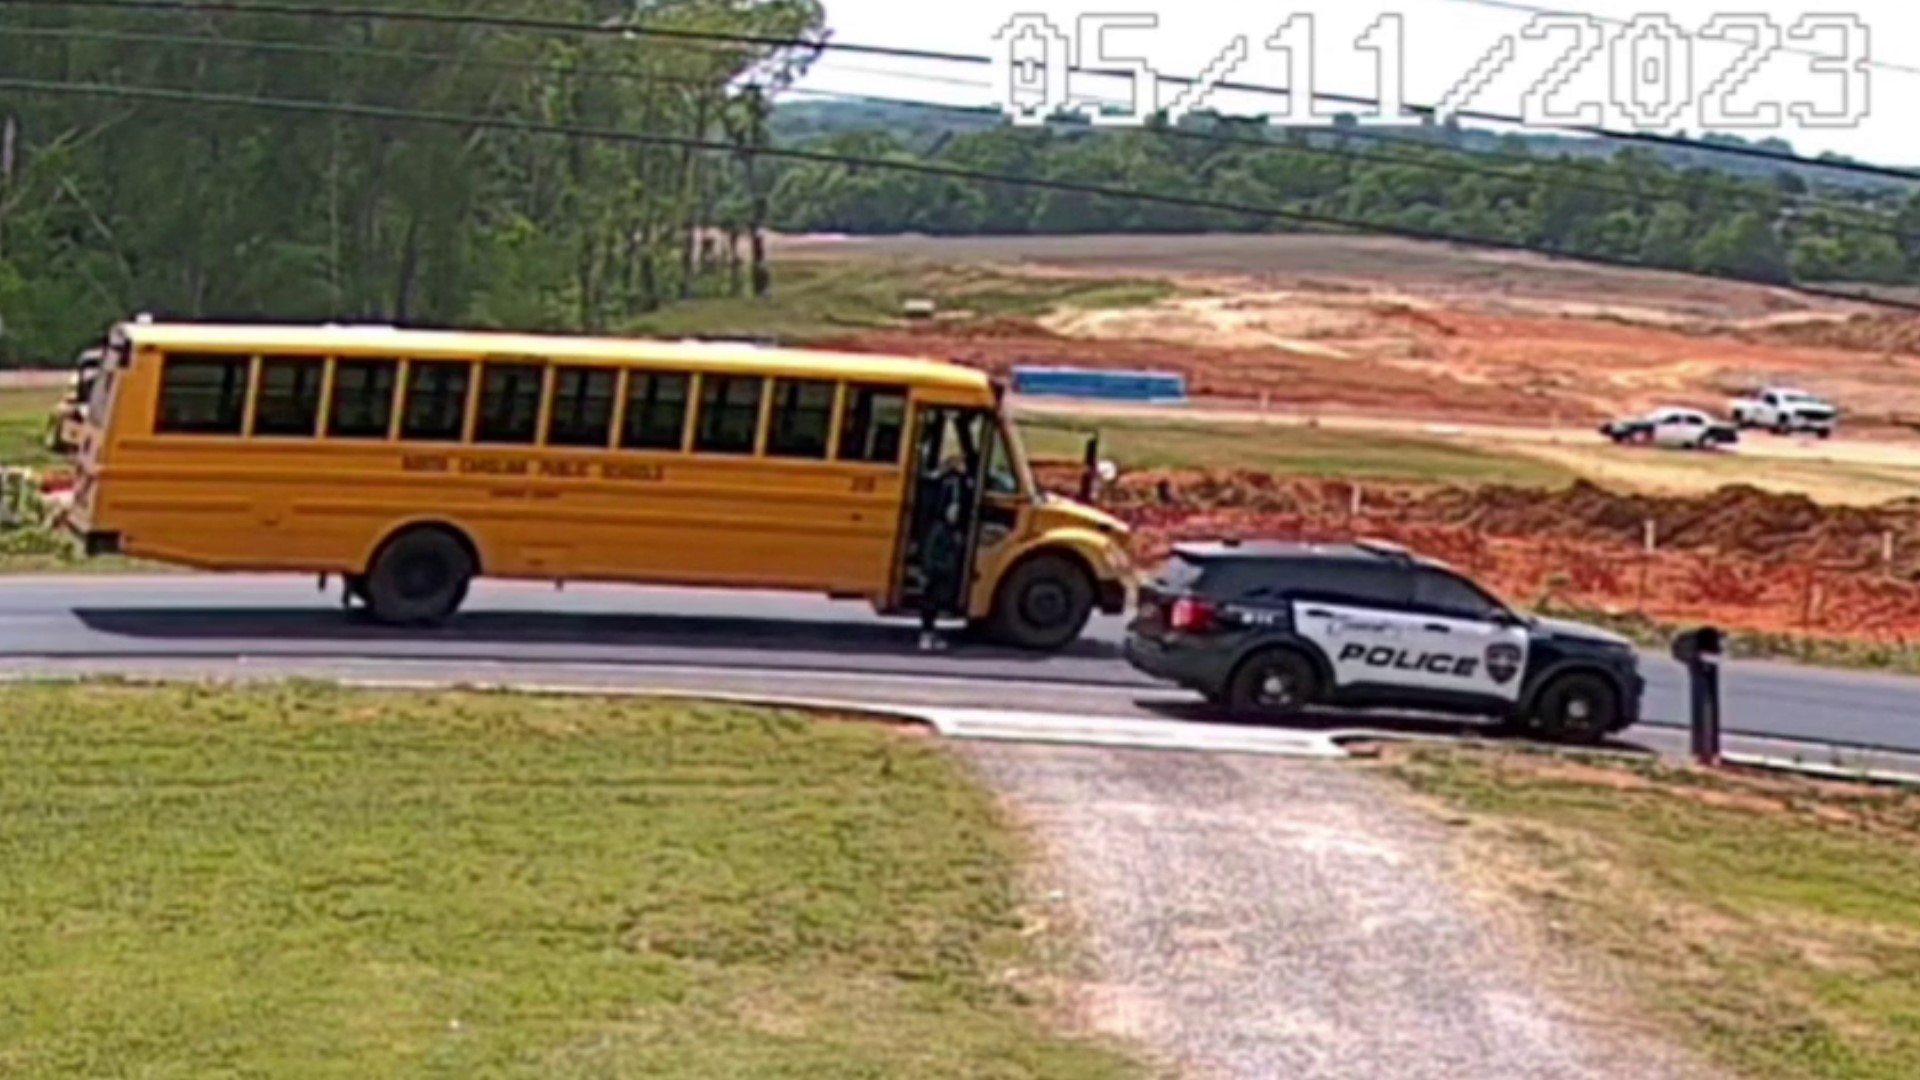 A student had just exited the stopped Cabarrus County school bus when a Concord police car passes the stopped school bus nearly missing the student.